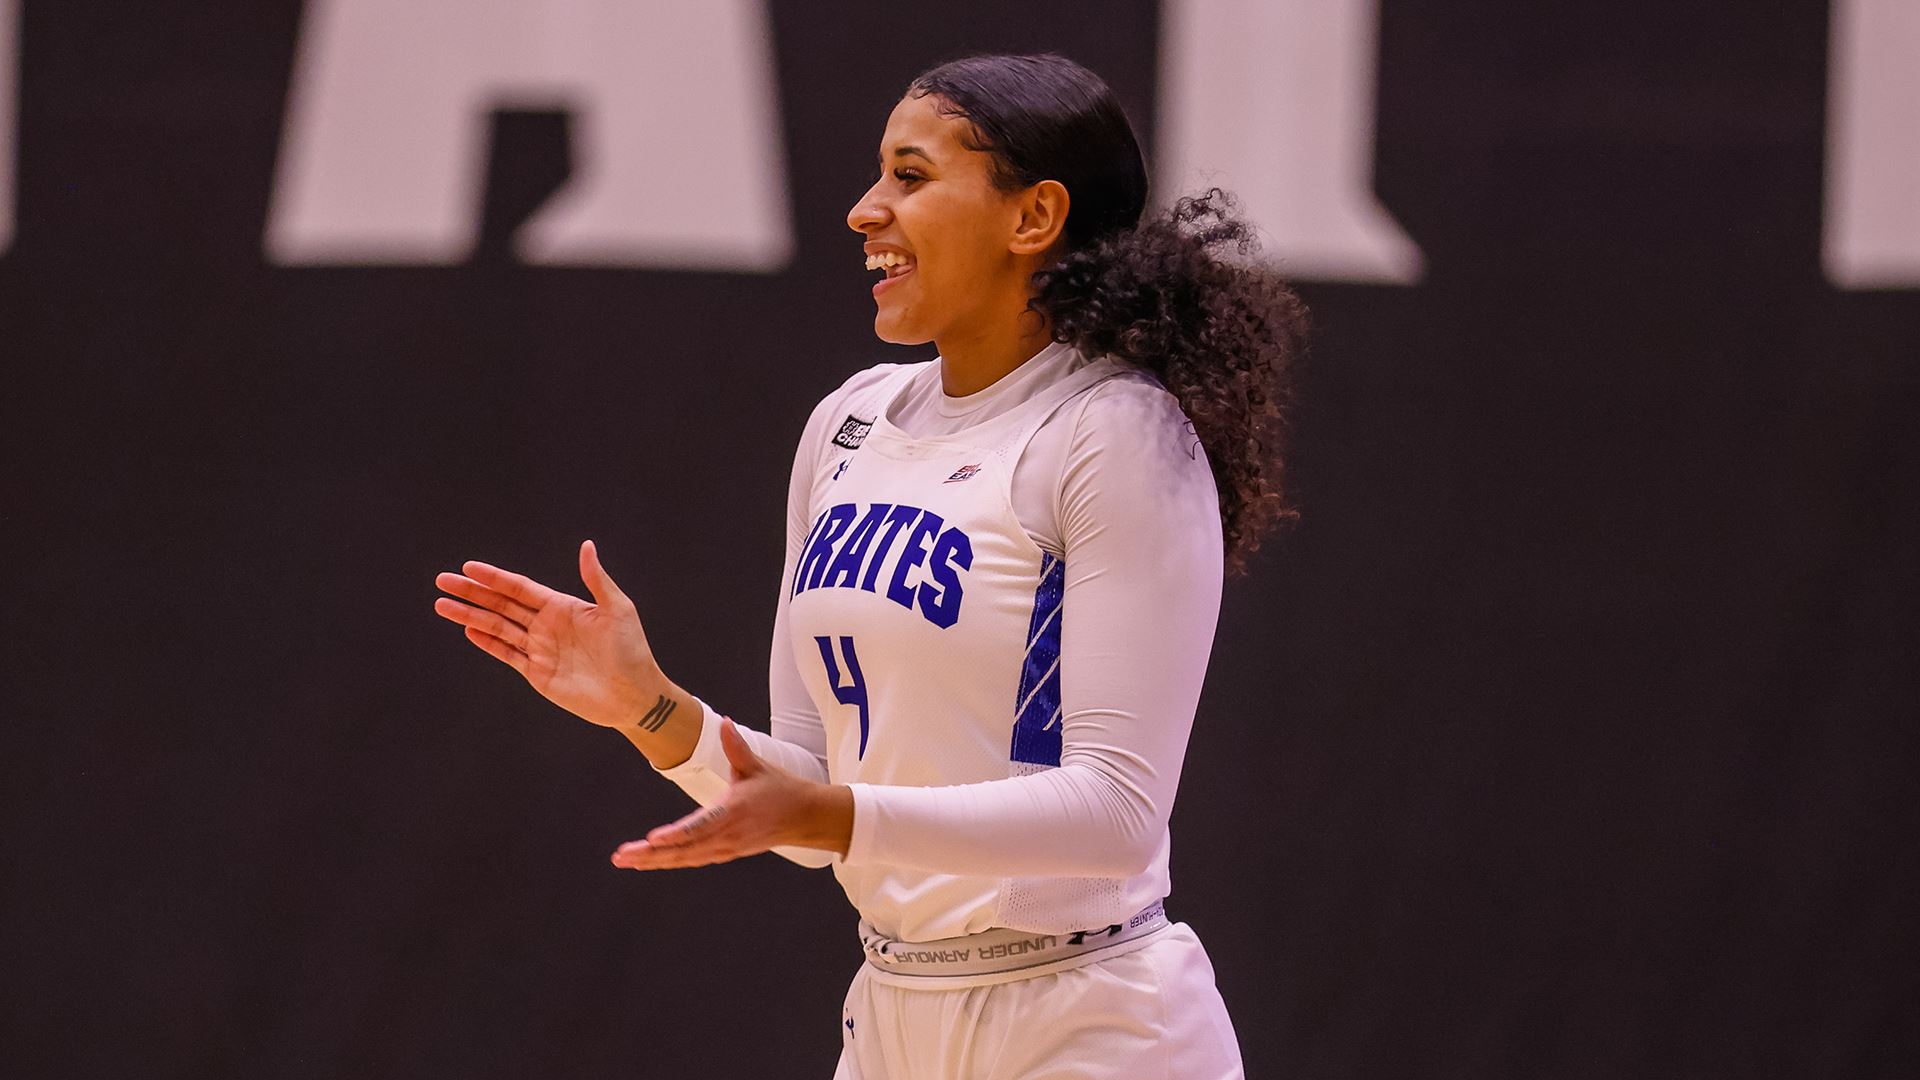 Seton Hall's Andra Espinoza-Hunter stands on the court during a women's basketball game vs. Lehigh.